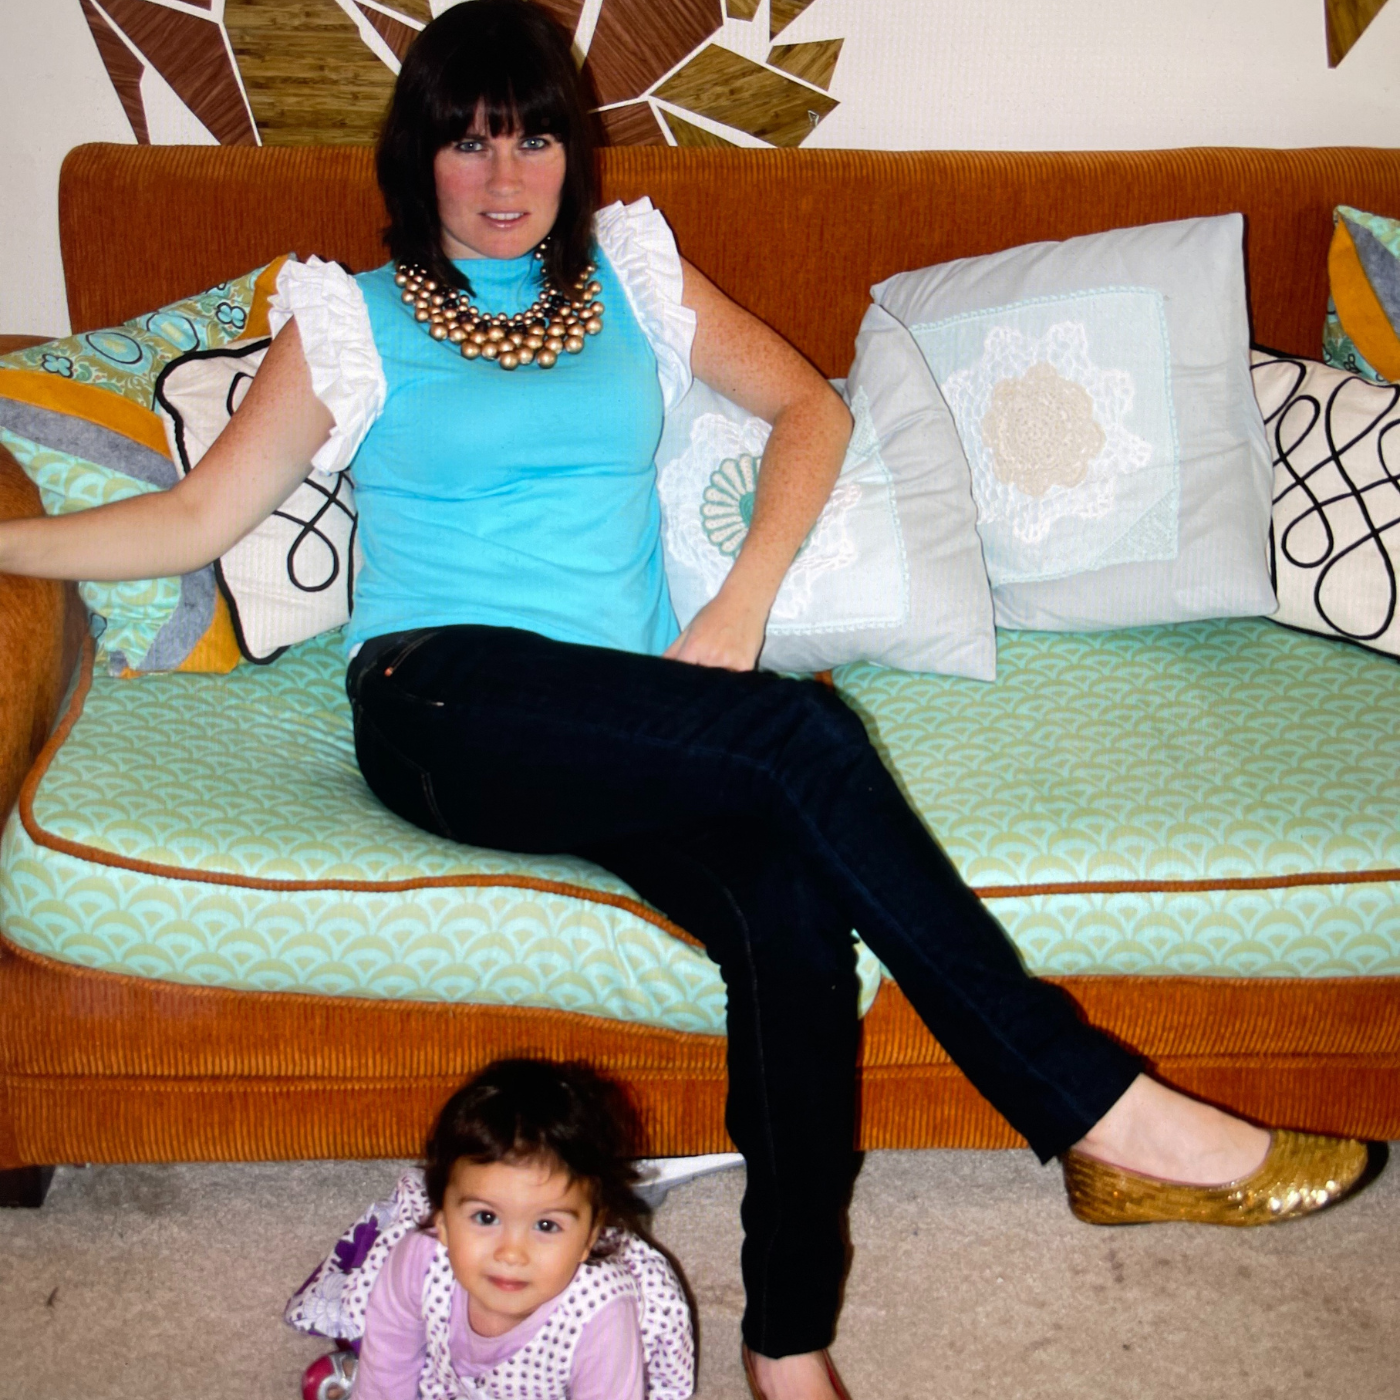 Katie Kortman sits on a mint green couch with a repeated tan half moon design and dark brown piping. She is wearing black pants, brown shoes, a turquoise top with short white ruffled sleeves and a bronze statement necklace consisting of several rows of small orbs linked together. Along the back of the couch are loads of pillows Katie made, some are gray with white doilies, some are white with black squiggles, some are bright green and floral. Behind Katie is a dark brown and light brown mural of geometric shapes on a white wall. Katie’s oldest daughter, when she was a baby, is on the floor in front of her, wearing a purple-and-white outfit. The shirt, couch covering, pillows and mural were all made by Katie.